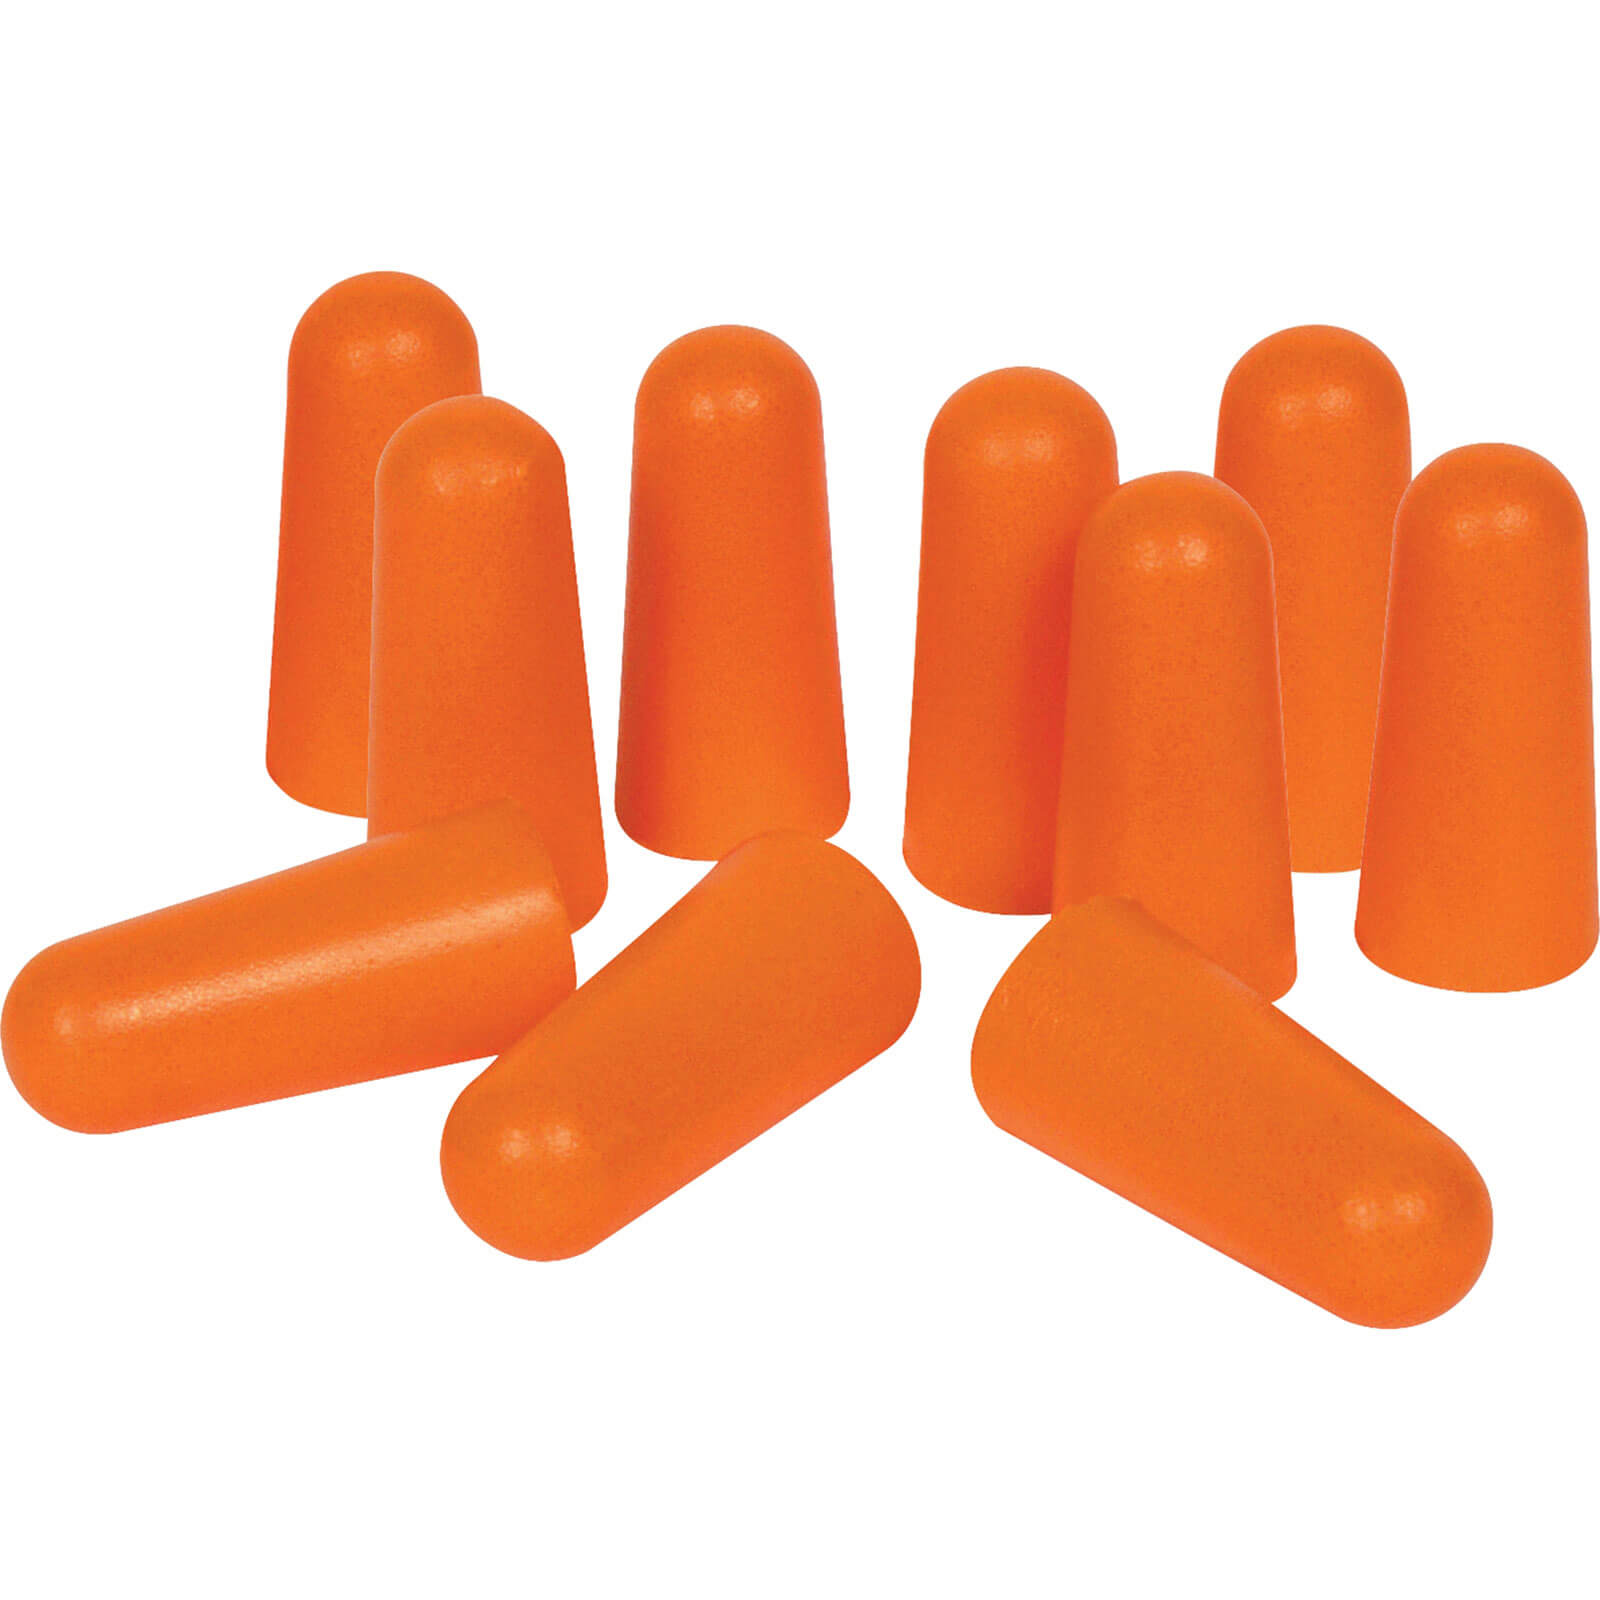 Image of Vitrex Tapered Disposable Ear Plugs Pack of 5